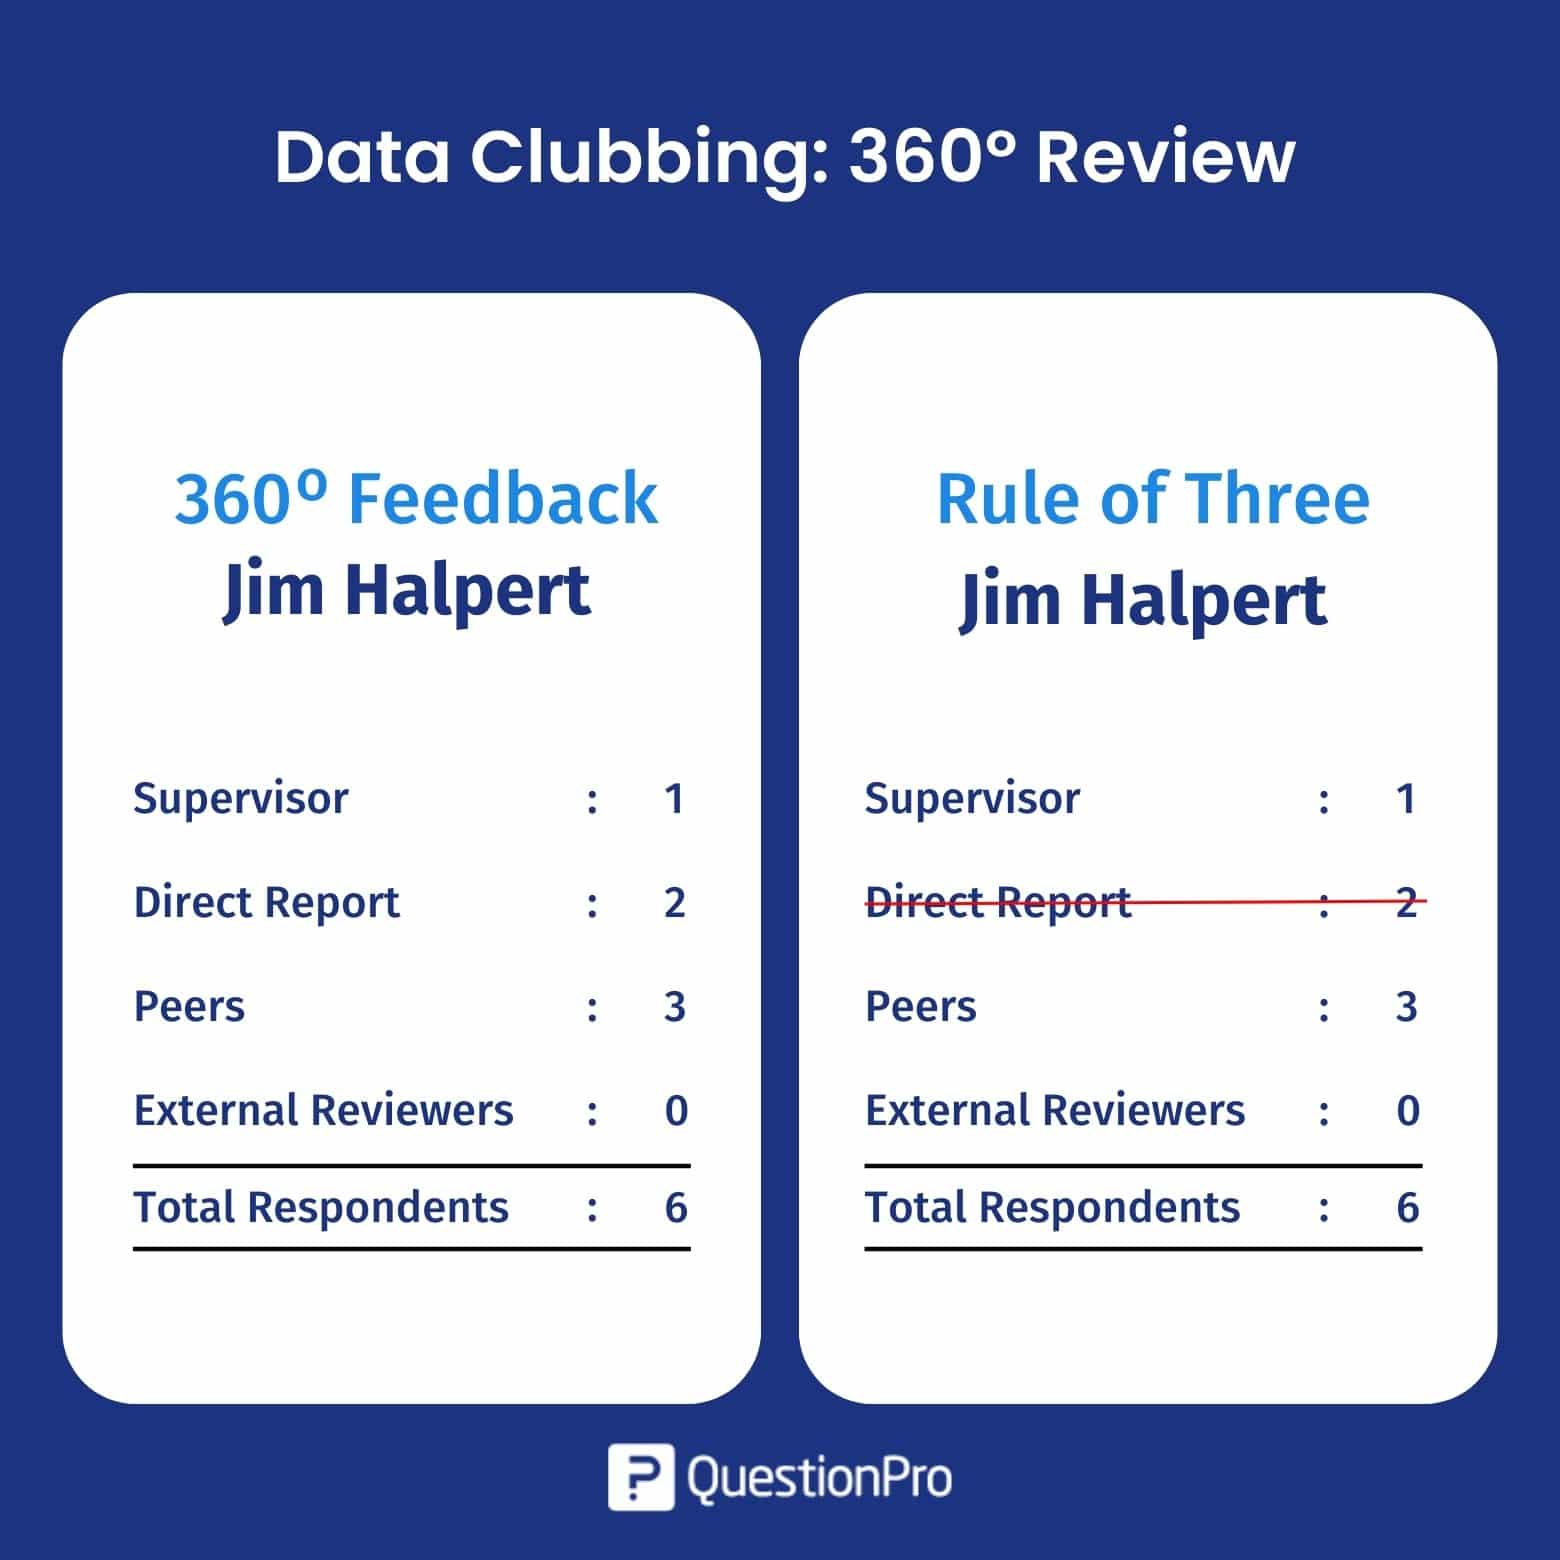 Data Clubbing 360º Review (Rule of Three)